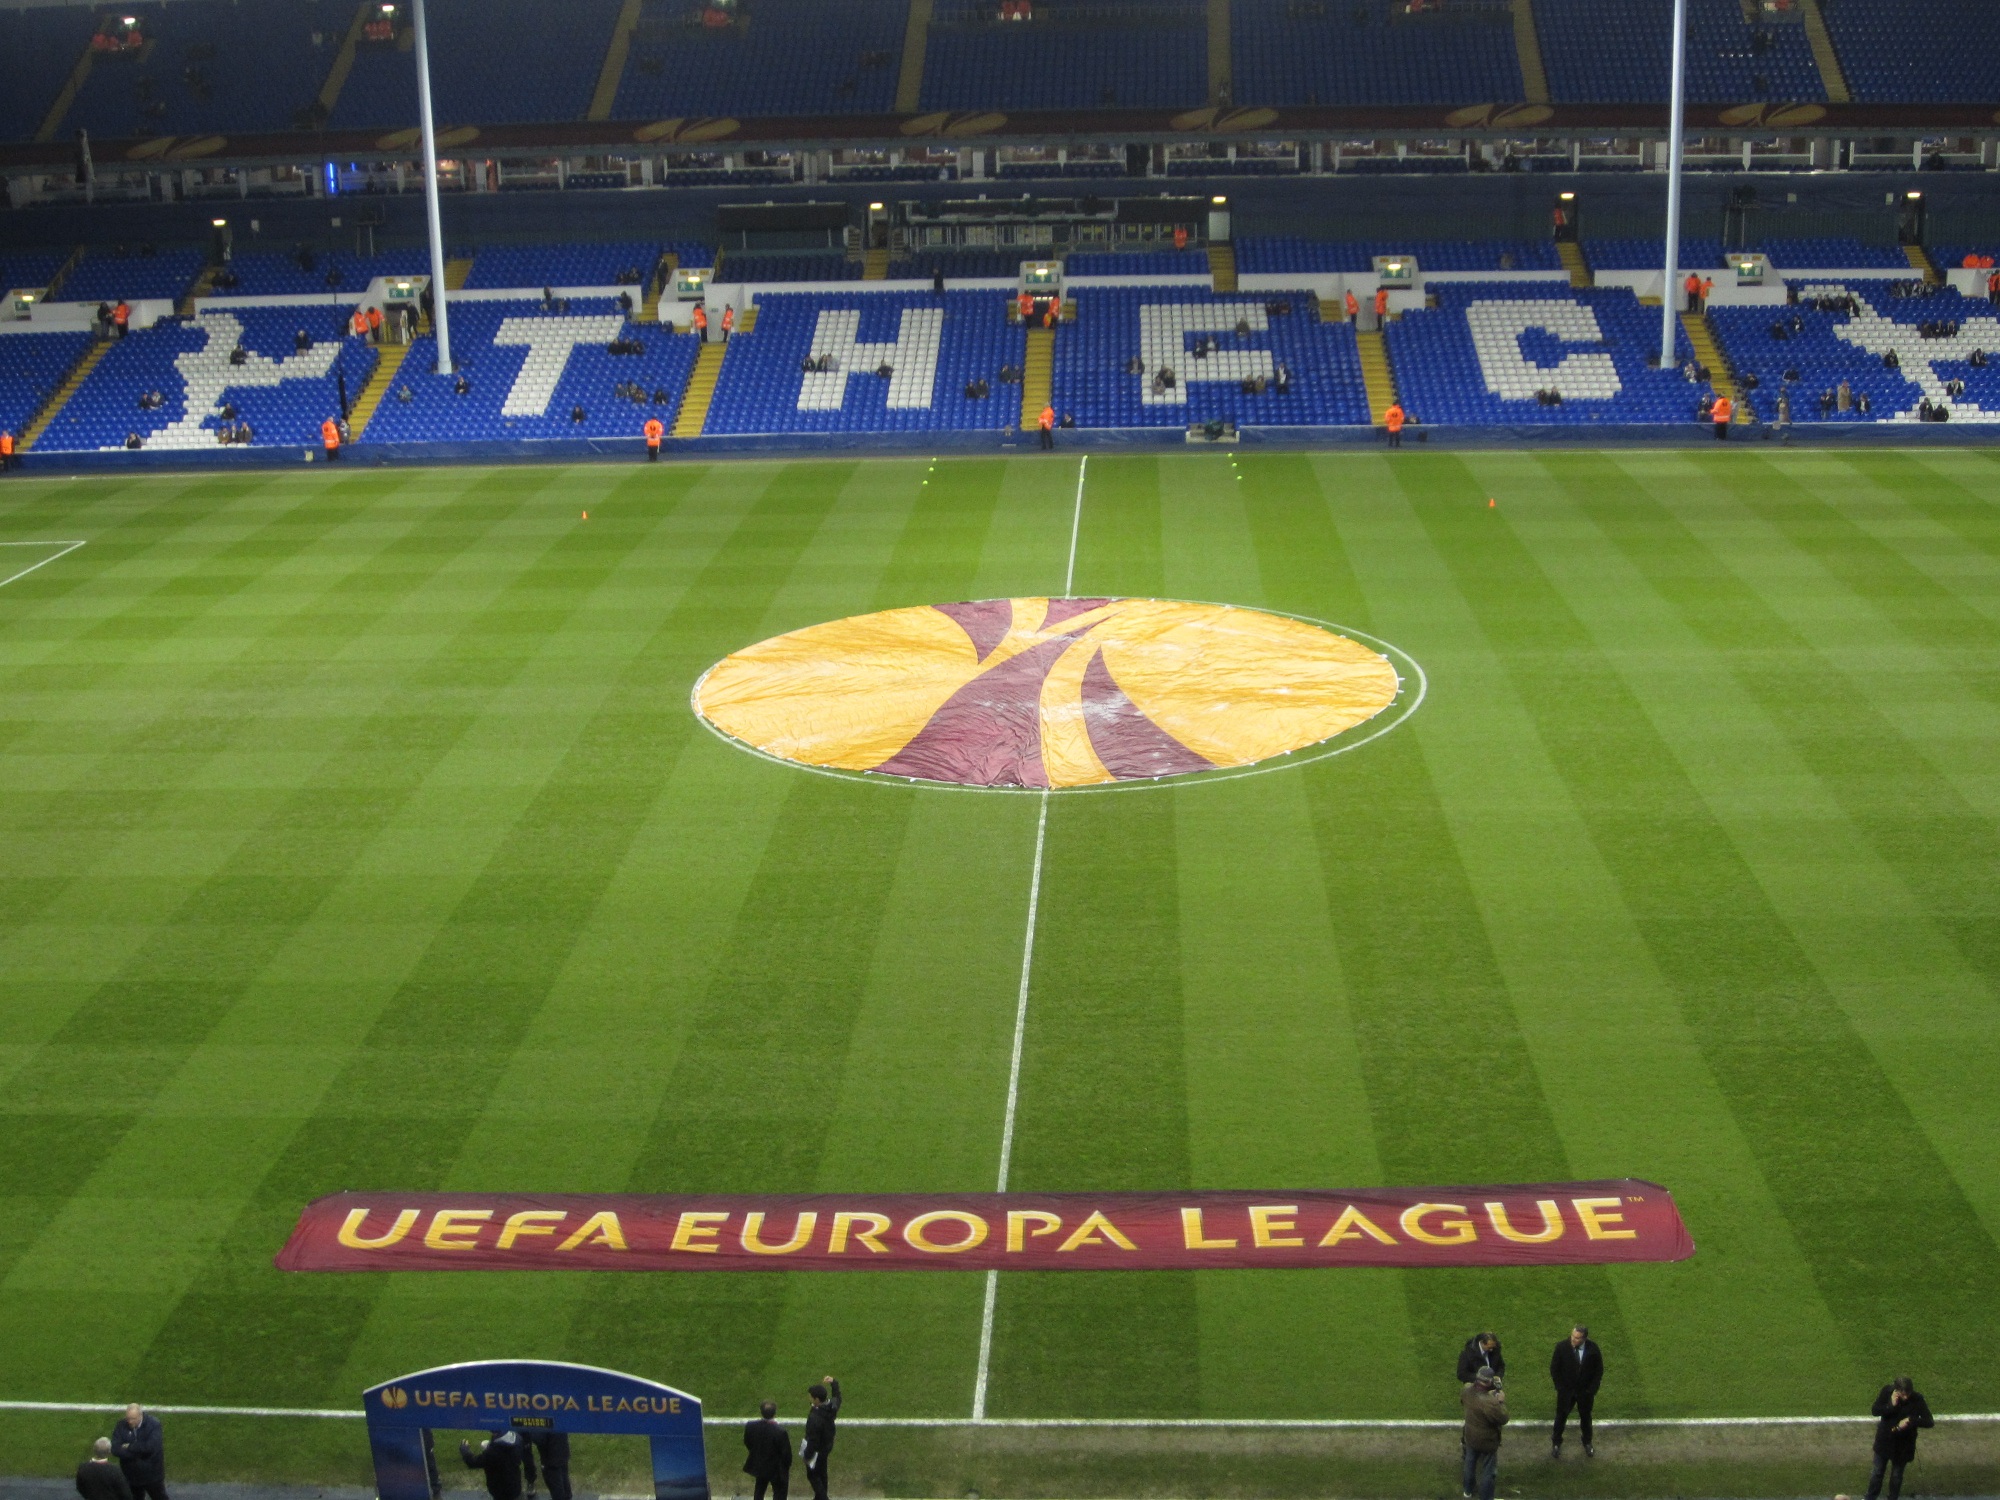 The Europa League will present us with a busy schedule